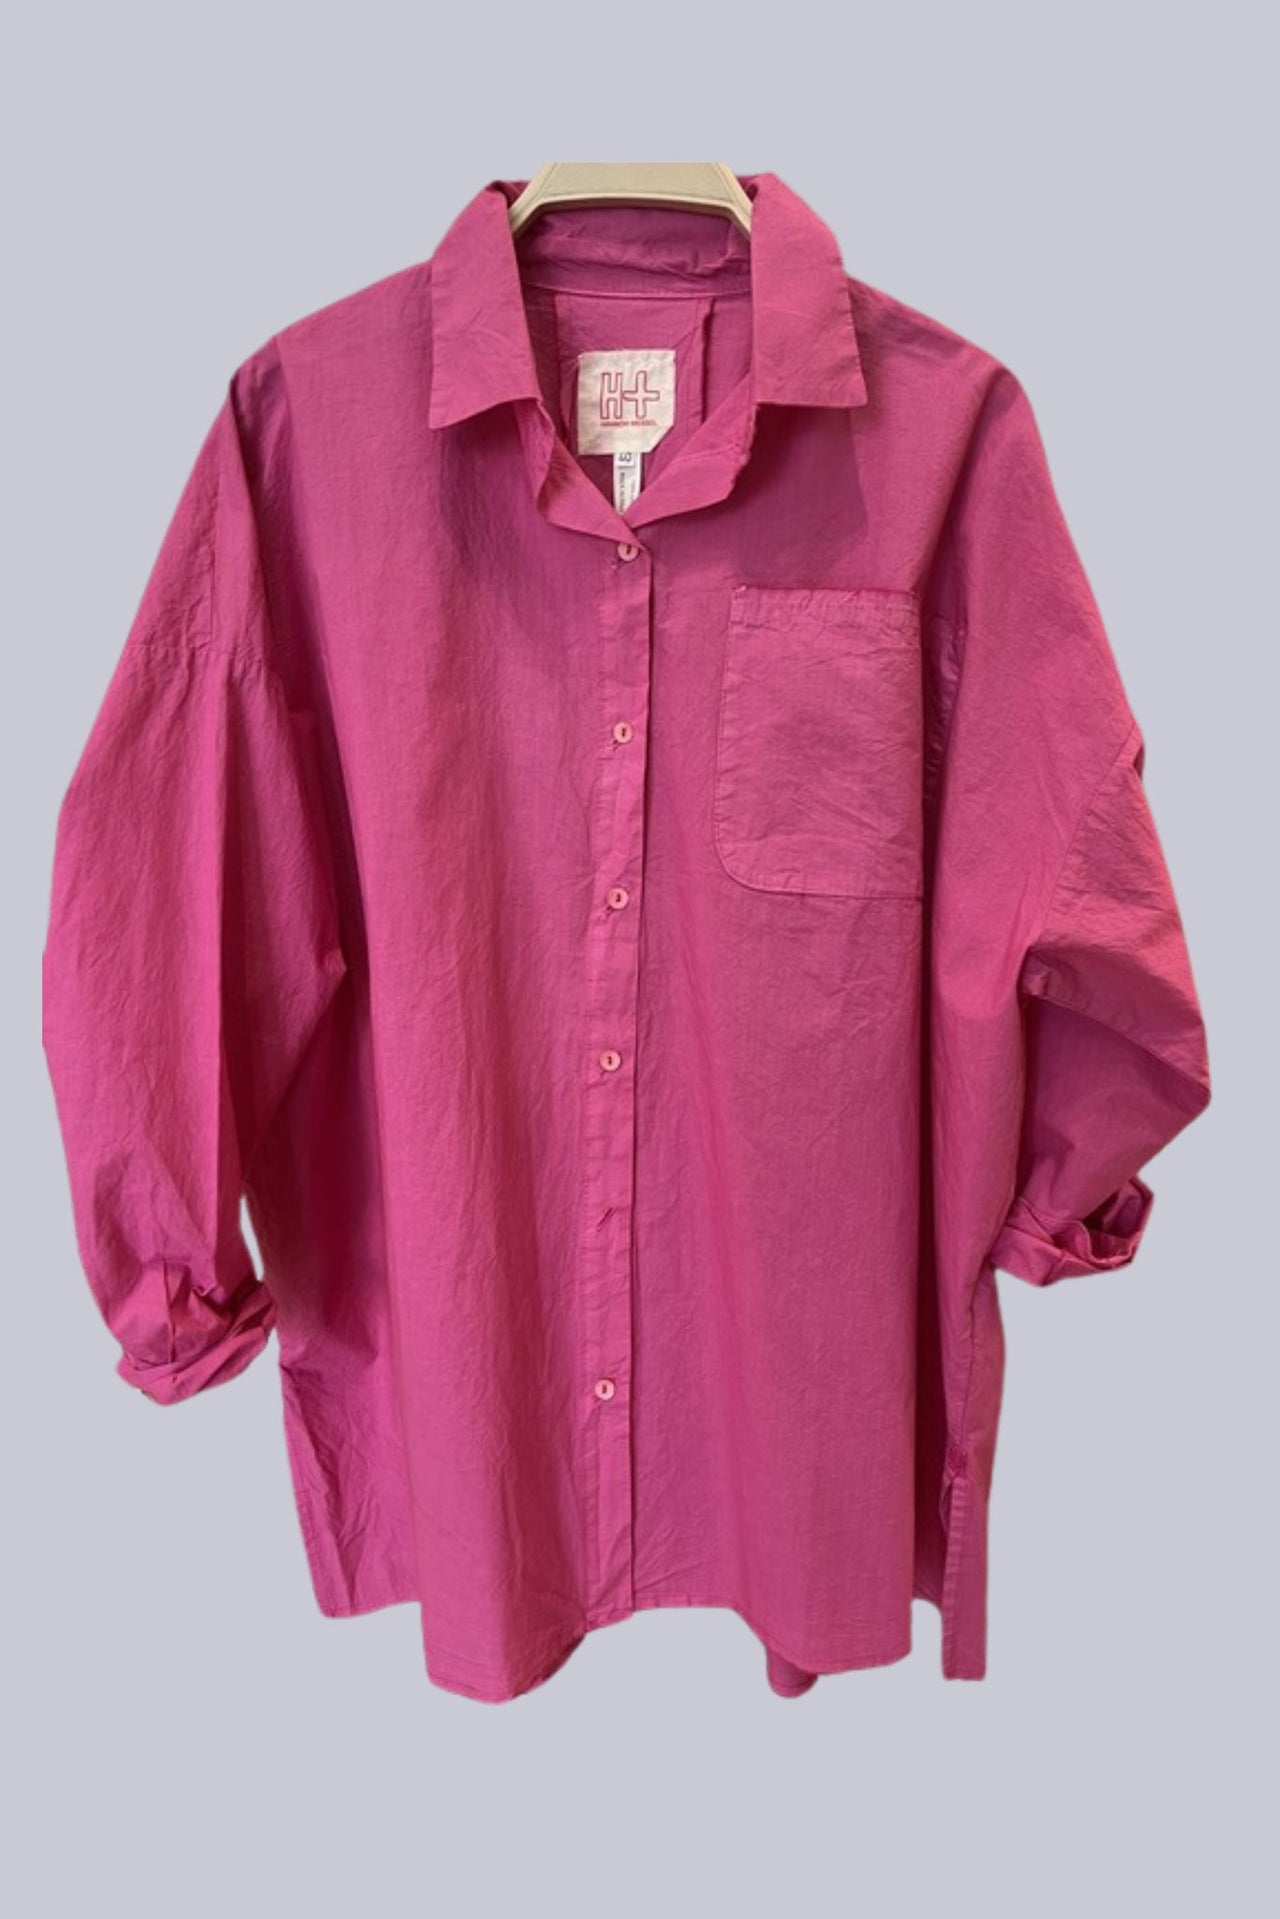 Clarence Shirt 60-SHIRT-Hannoh Wessel-Debs Boutique